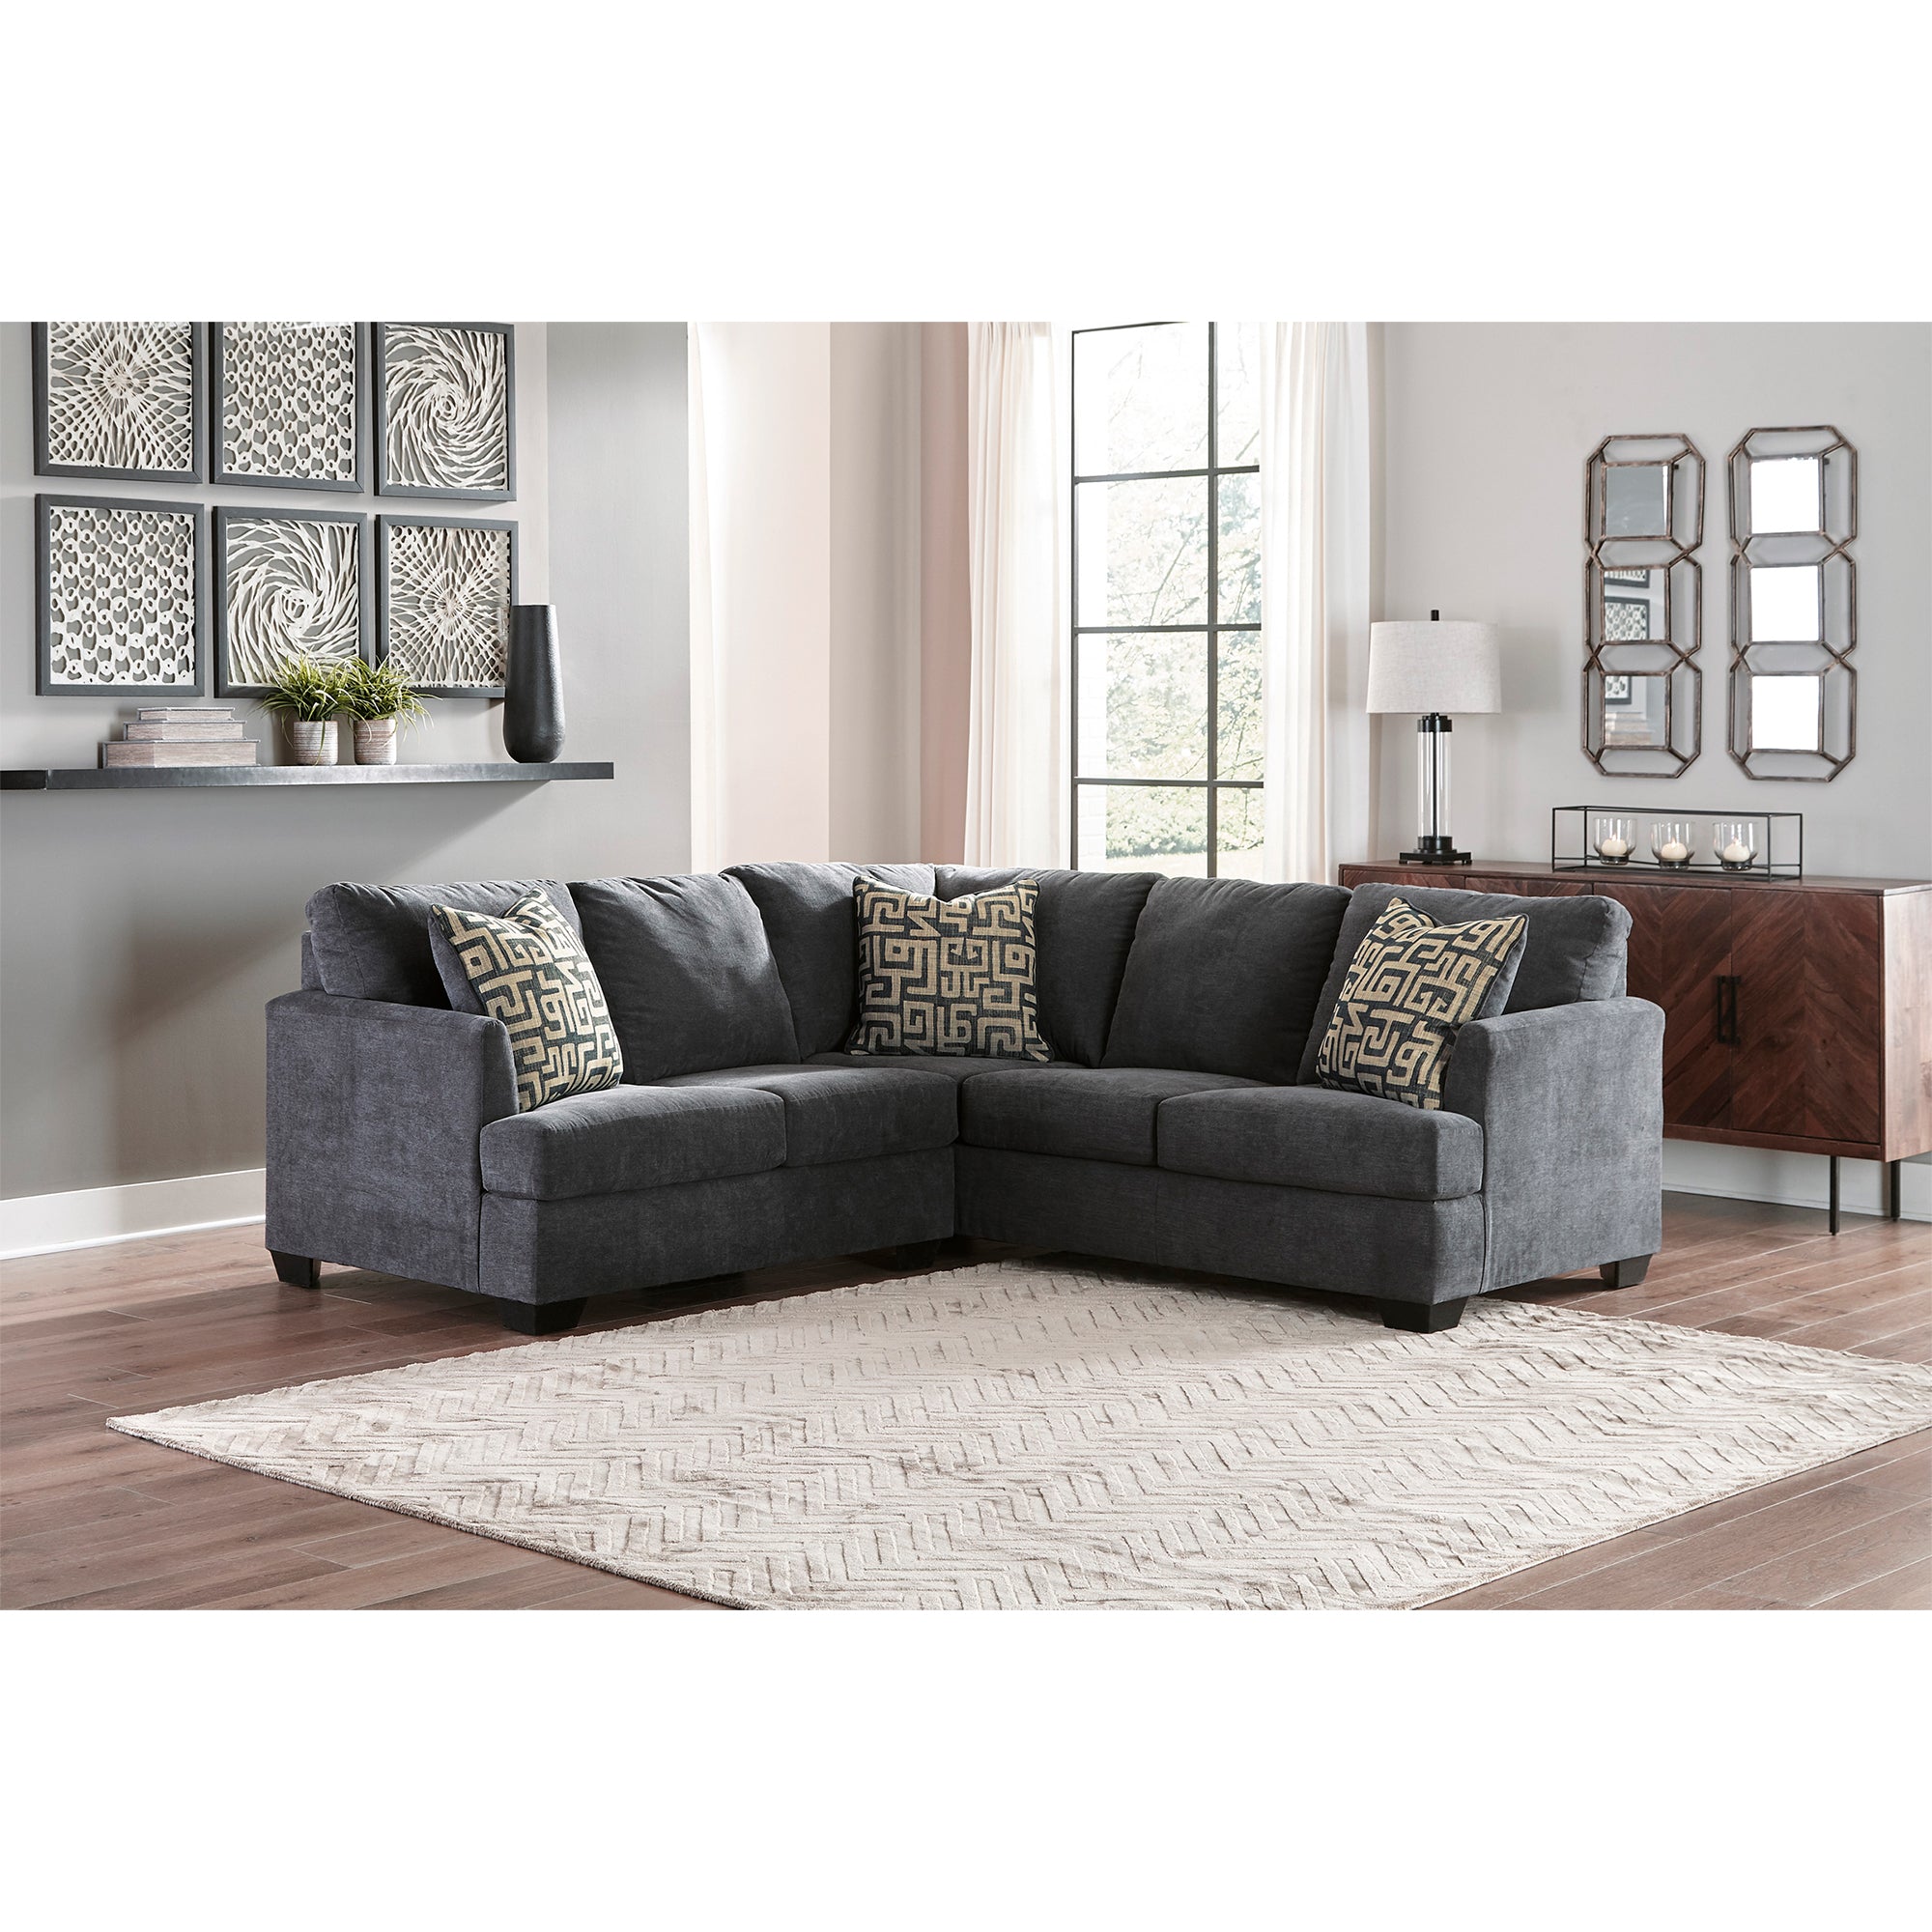 Ambrielle 2-Piece Sectional in Gunmetal Color